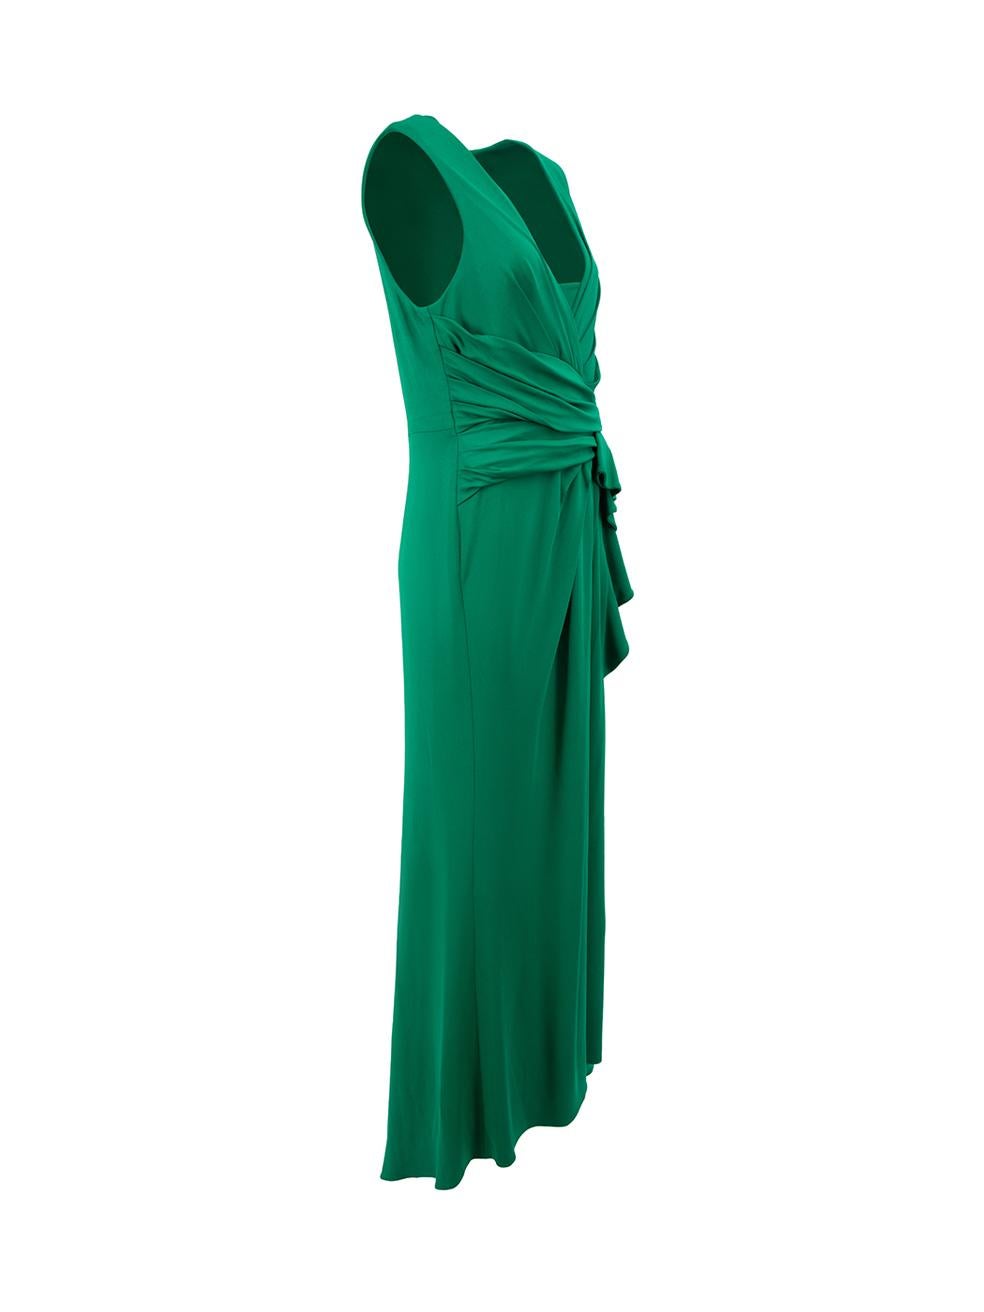 CONDITION is Good. Minor wear to dress is evident. Light wear with white marks on right-side slit on this used Elie Saab designer resale item. 



Details


Emerald green

Viscose

Maxi gown

Gathered and ruffles accent

V neckline

Back zip